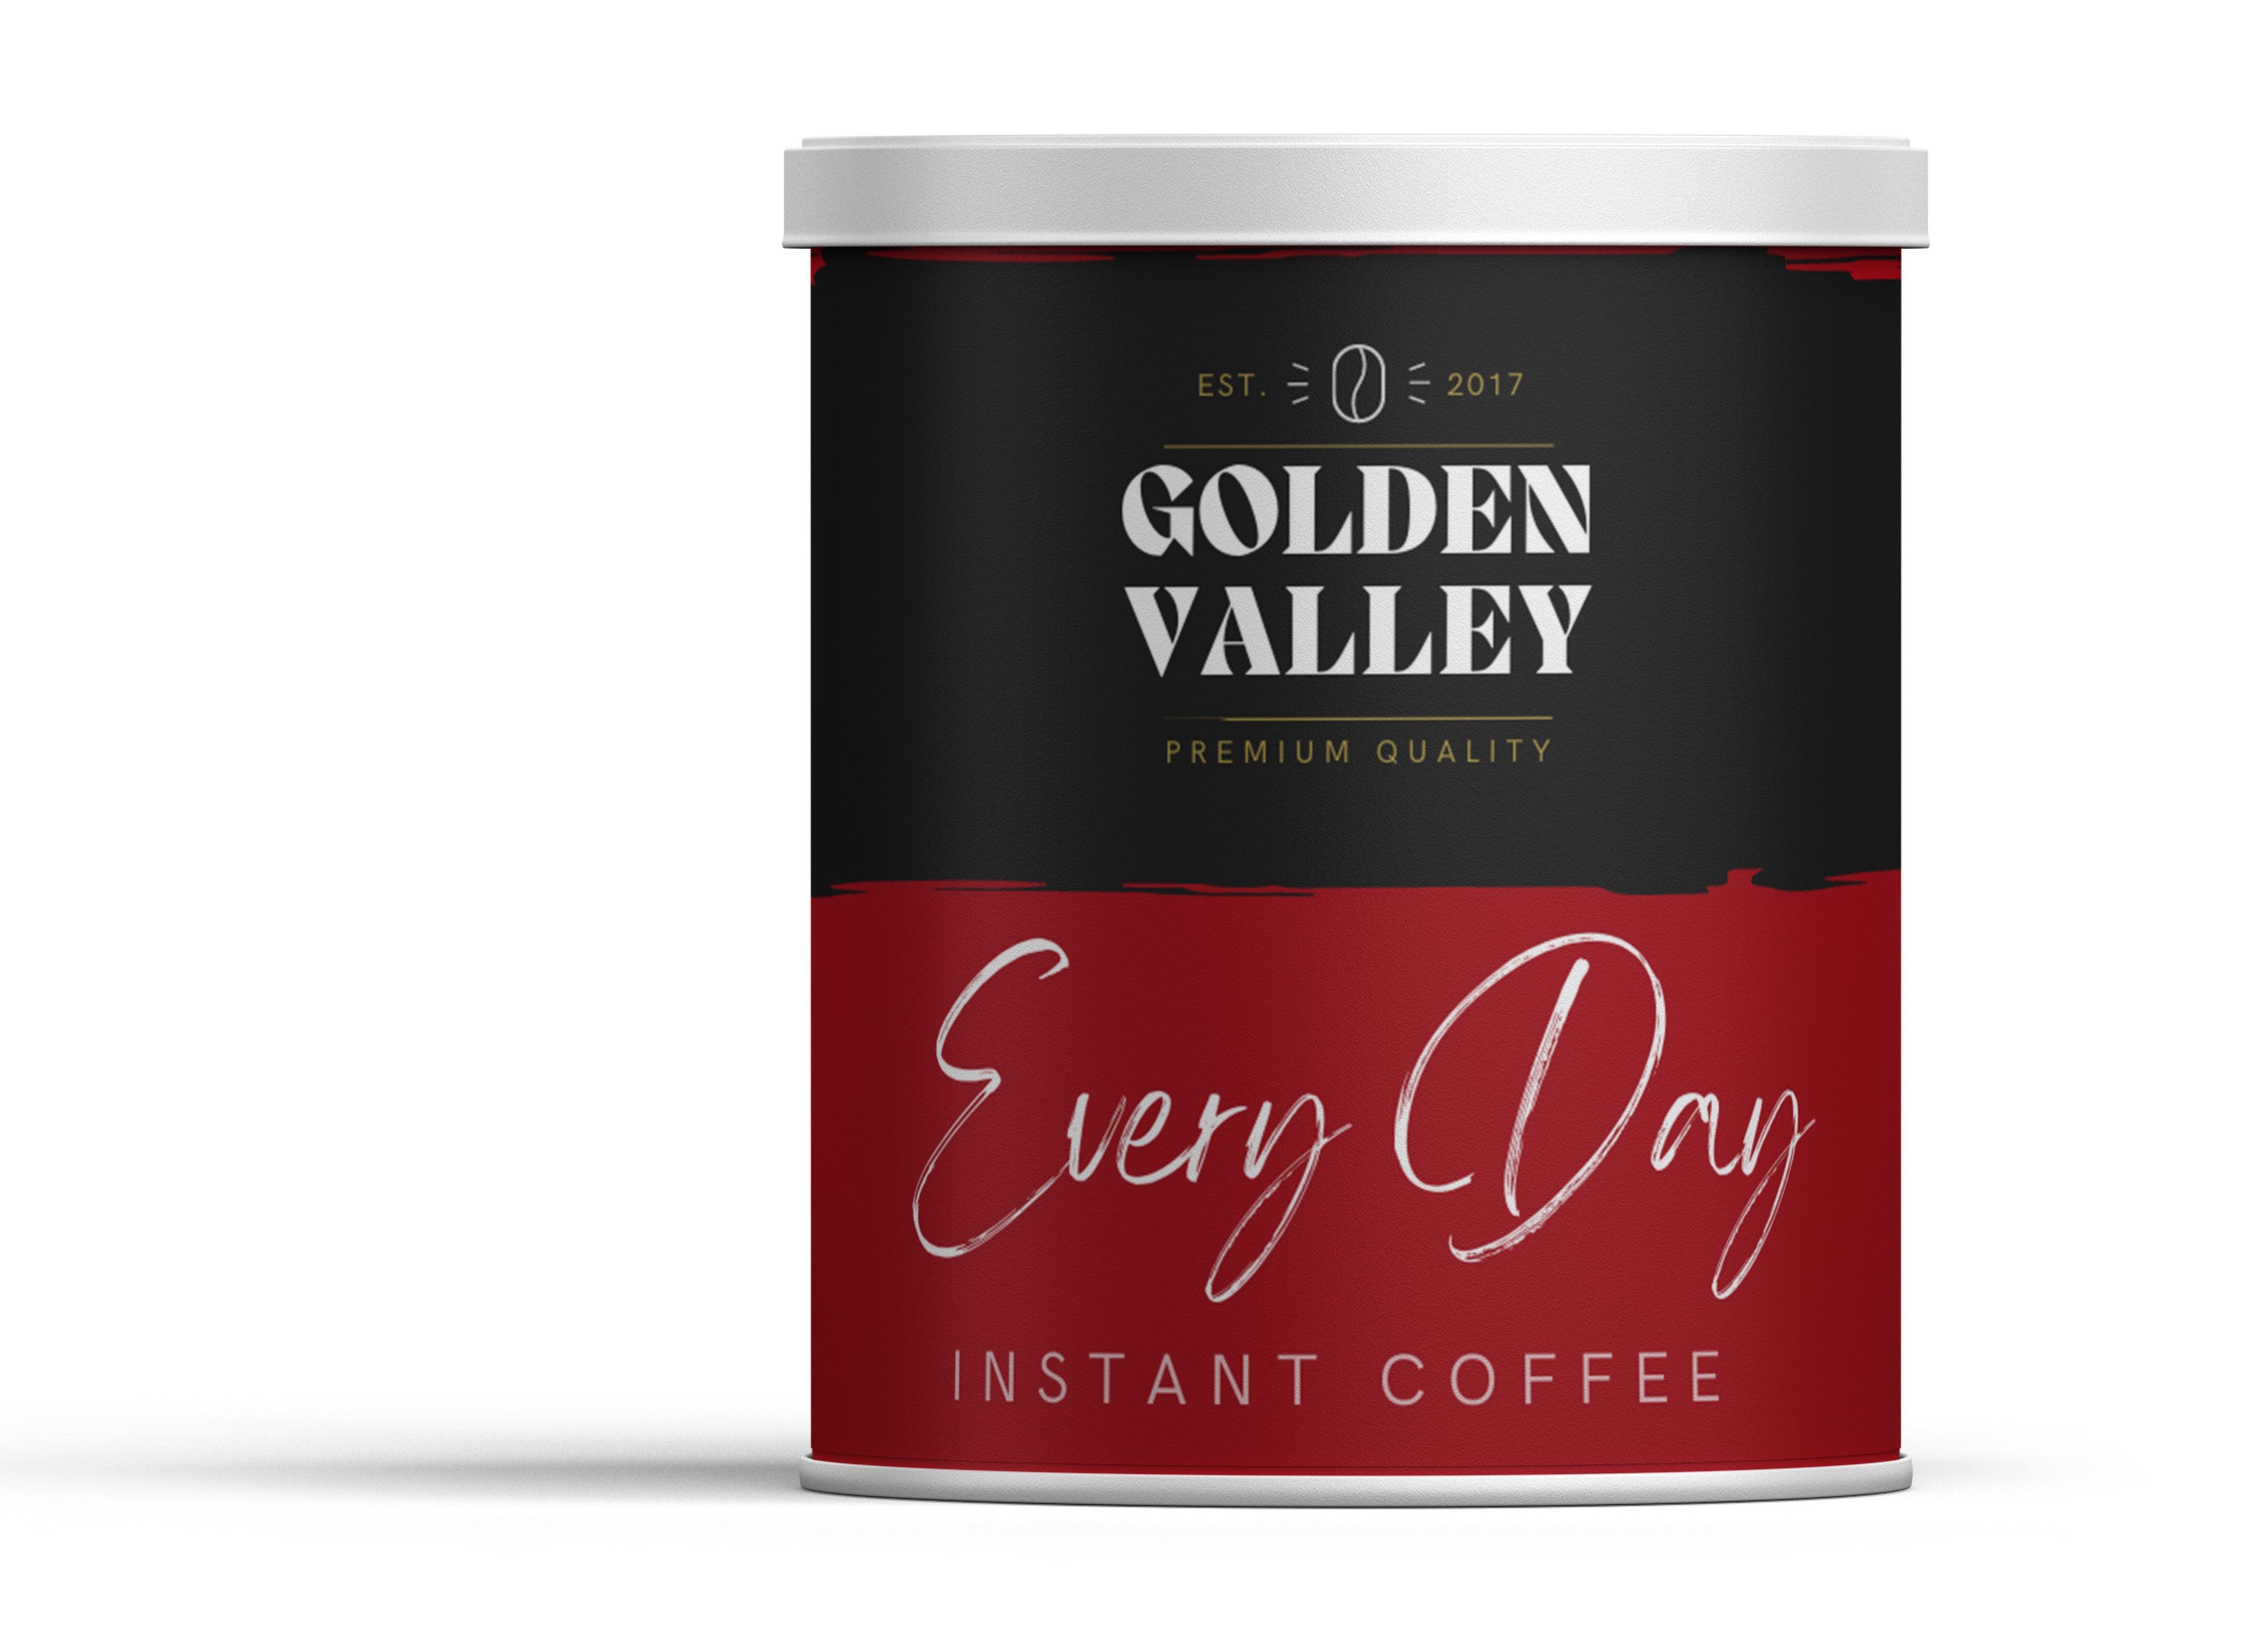 Golden Valley Everyday Blend: Granulated Coffee Tin 750g (Ideal for the workplace) - Vending Superstore